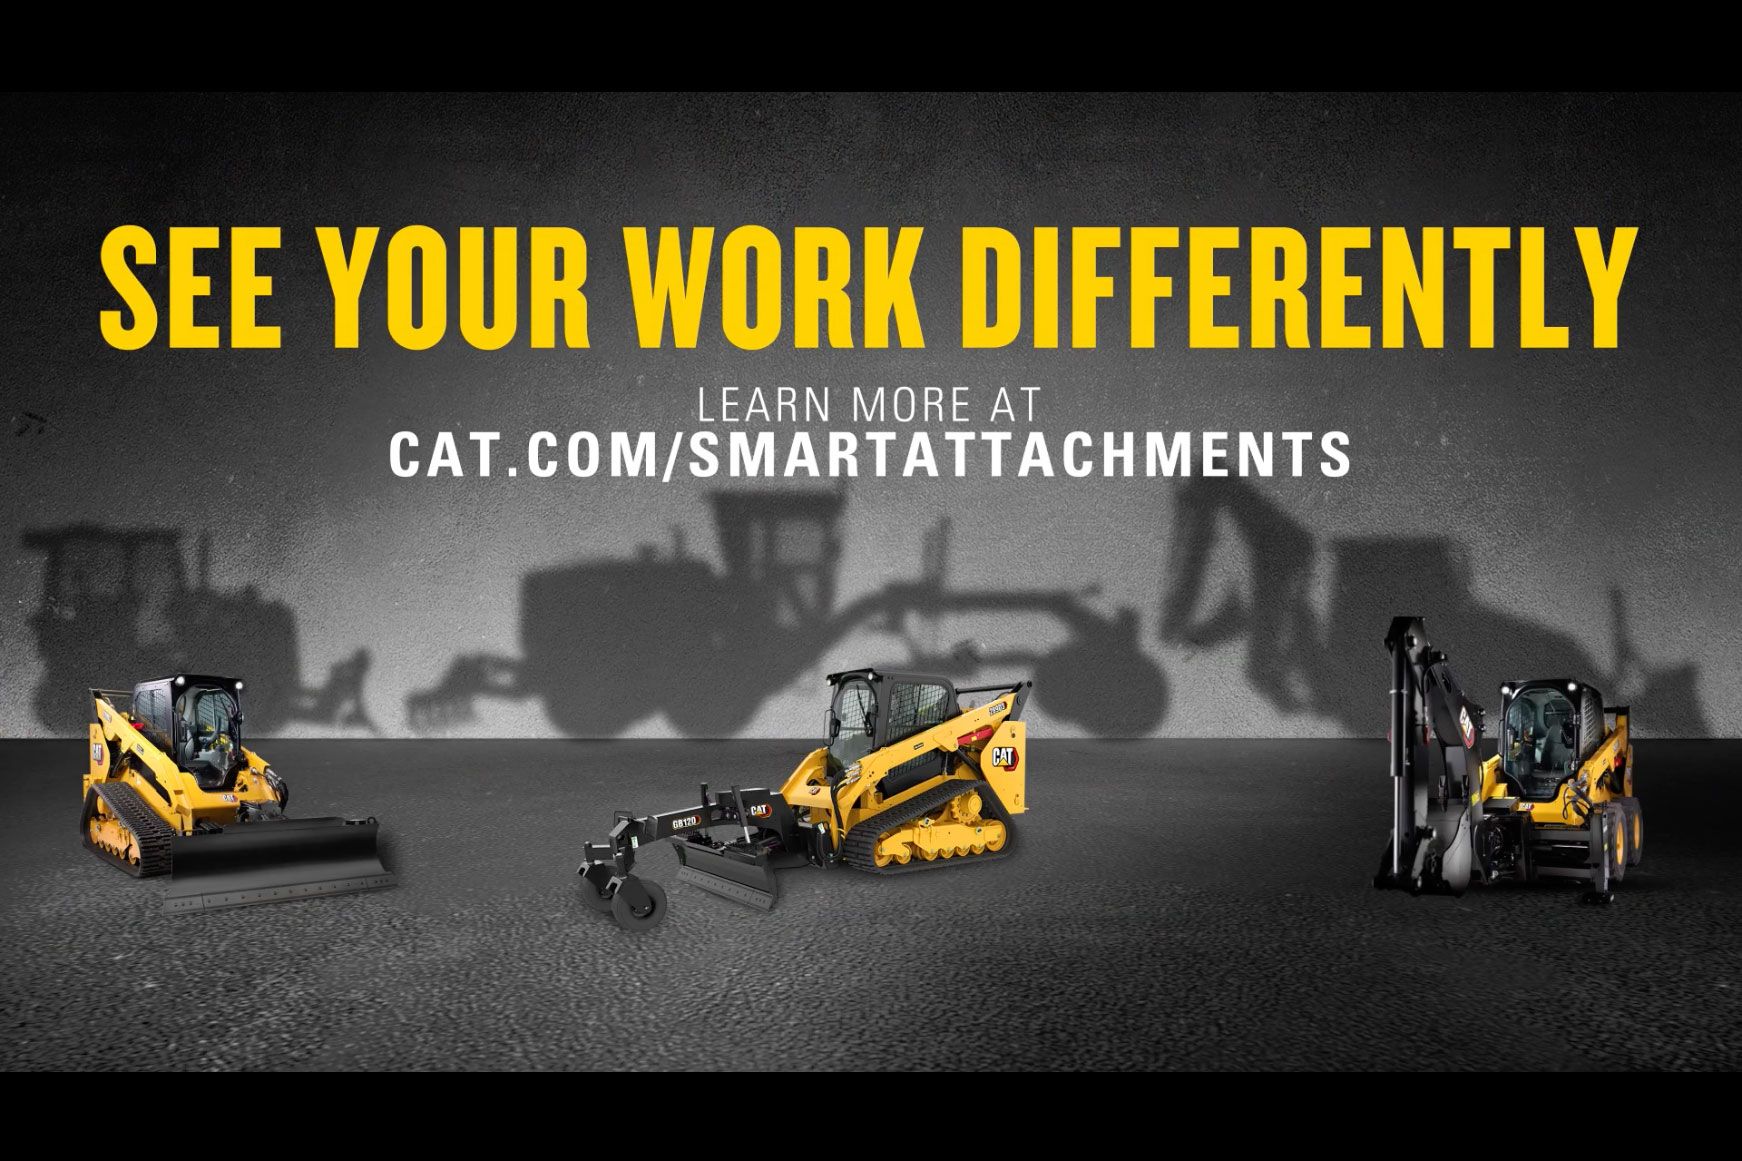 Transform your Machine and Workday with Cat® Smart Attachments.